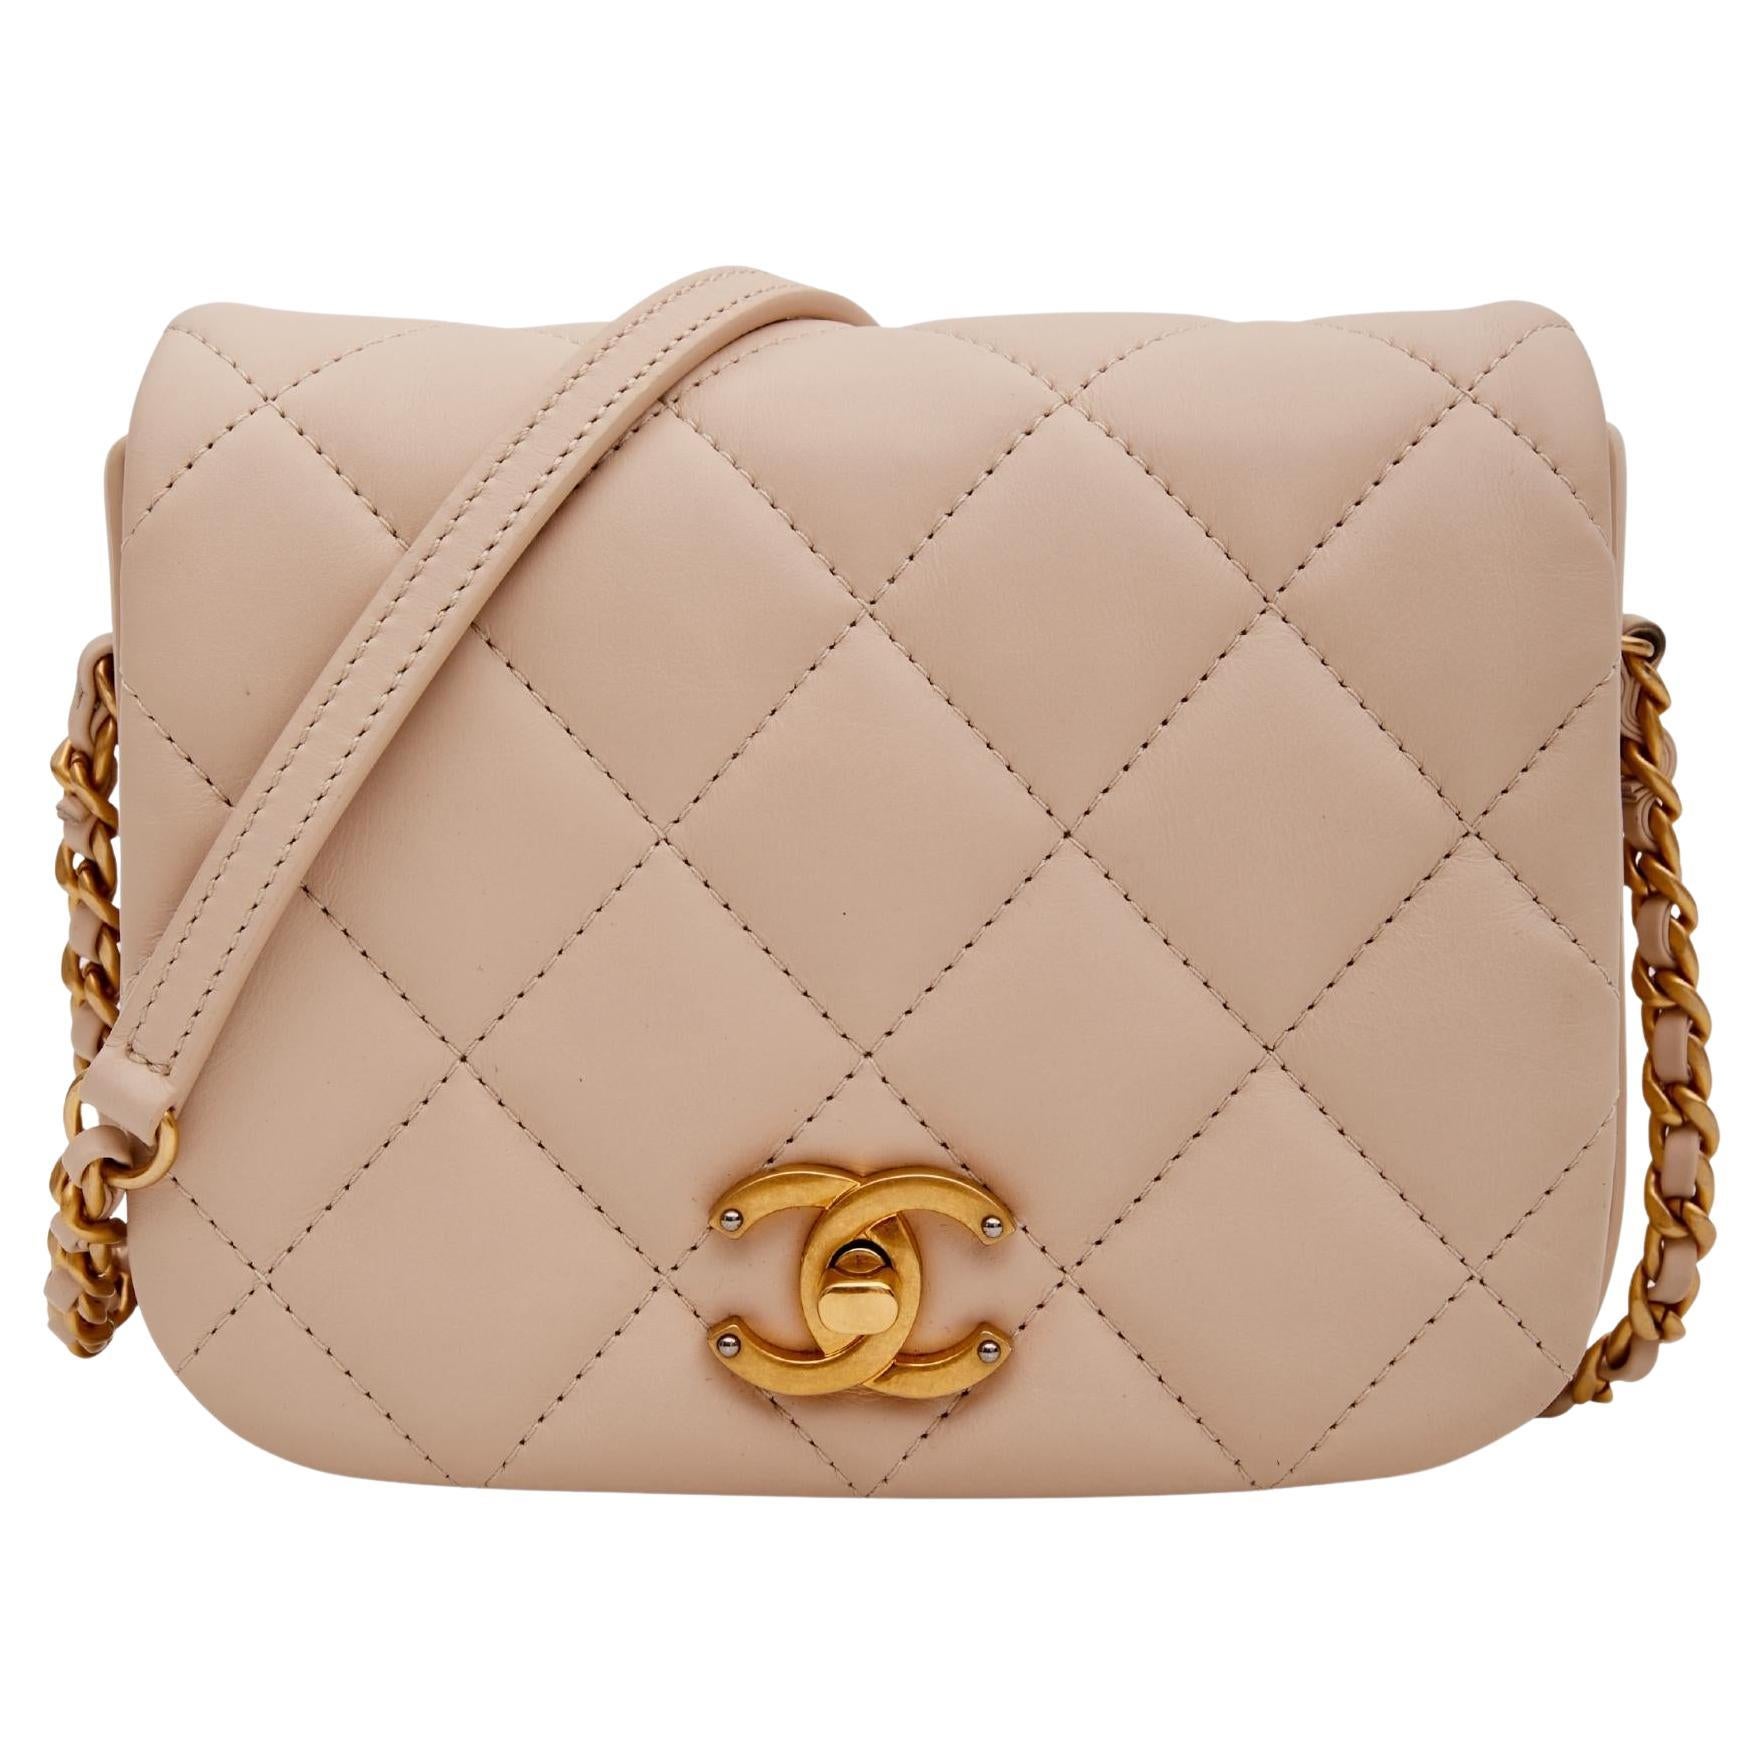 CHANEL Medium Fashion Therapy Flap Quilted Caviar Crossbody Bag Nude